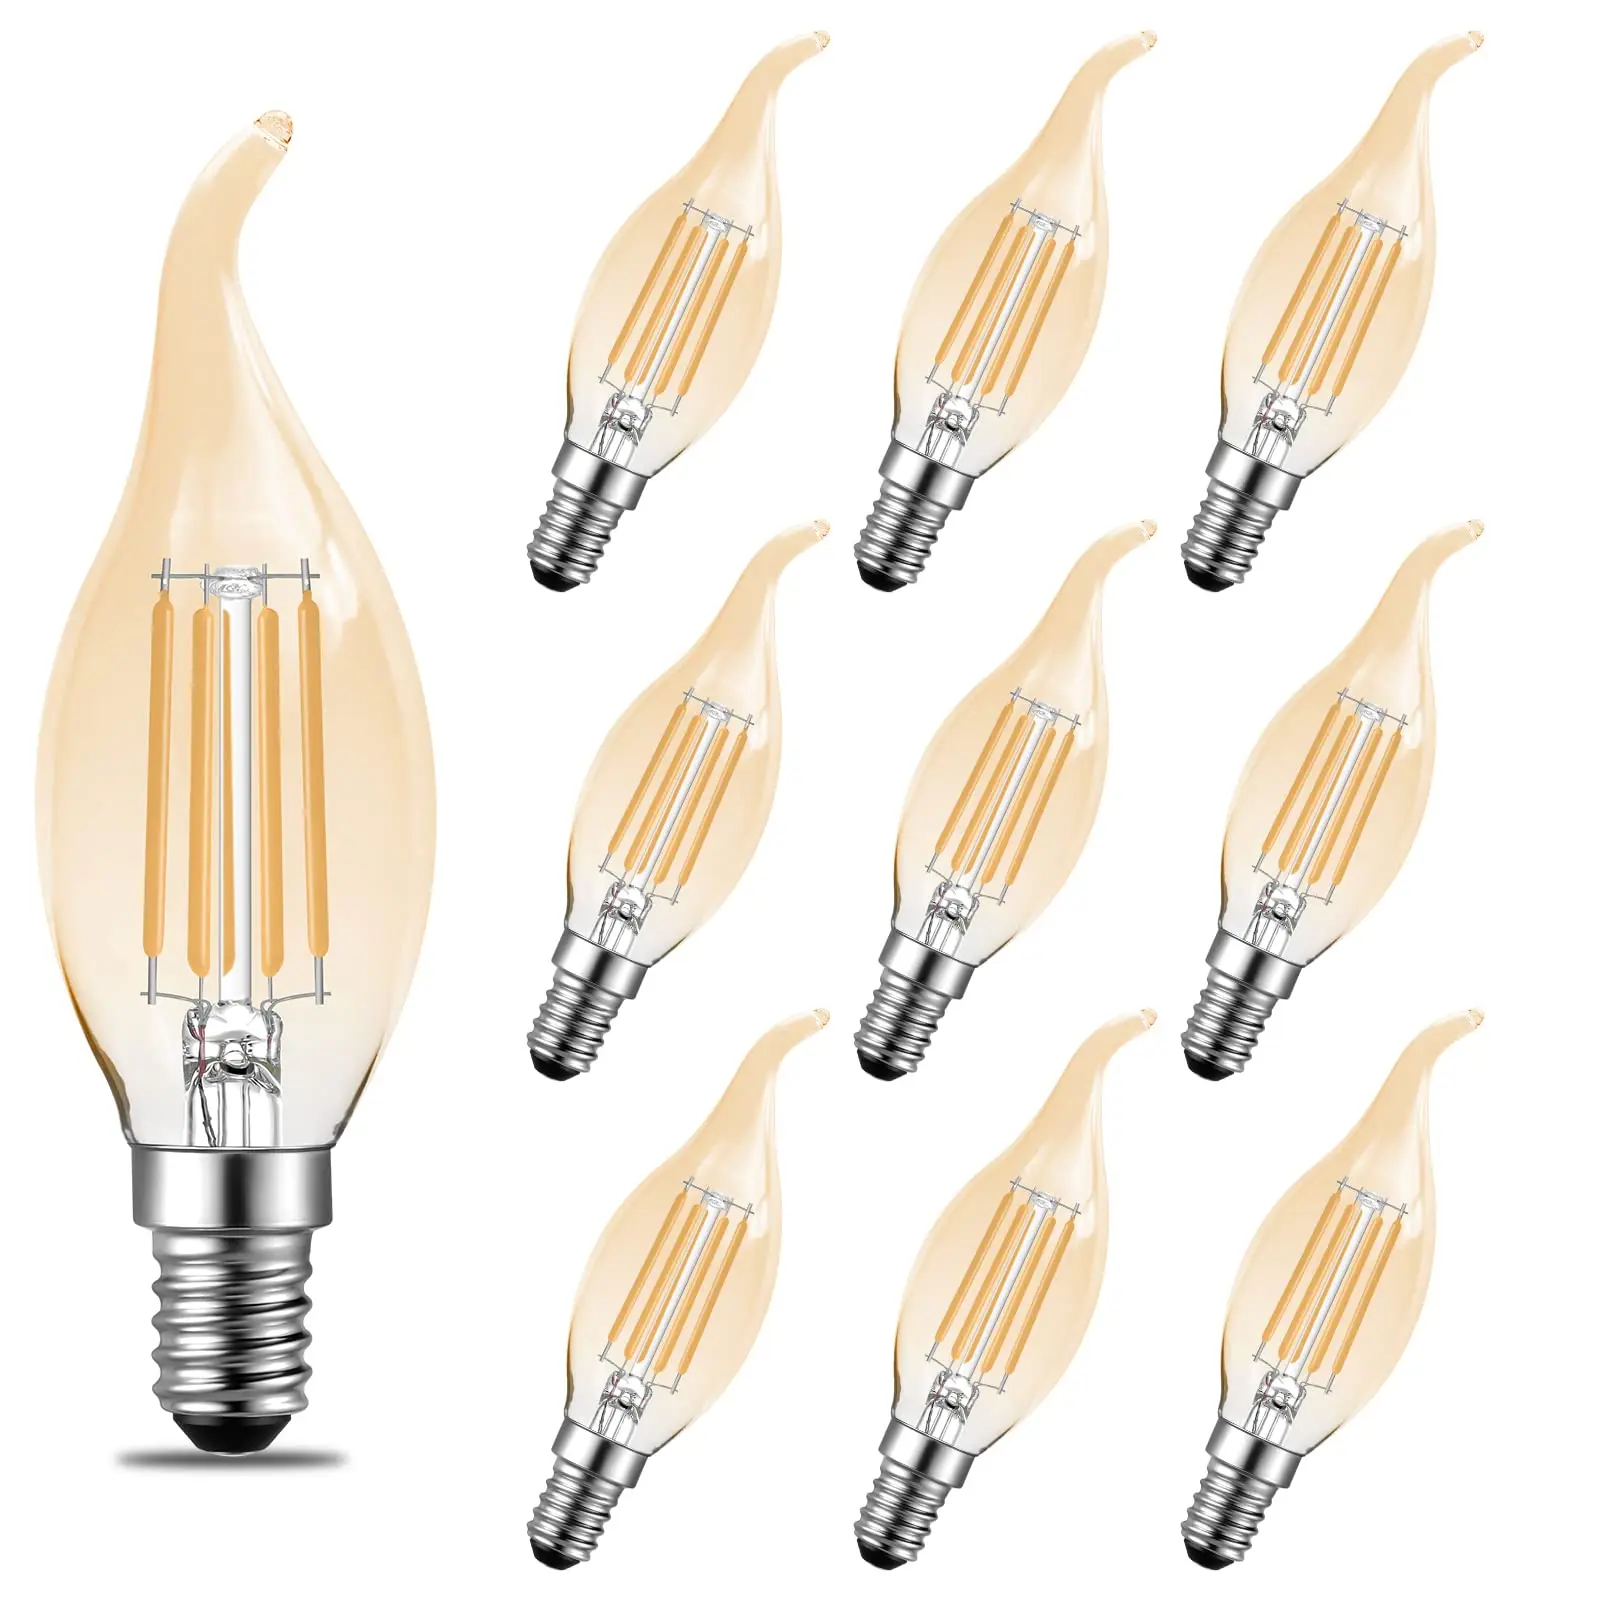 C35 Candle Bulb 4W Dimmable Led Filament Bulb E14 Candelabra Base Warm White Flame Shape Bent Tip Lamps For Chandelier Light genixgreen c35 candle bulb 4w dimmable led filament bulb e12 e14 candelabra base flame shape bent tip lamps for chandelier light